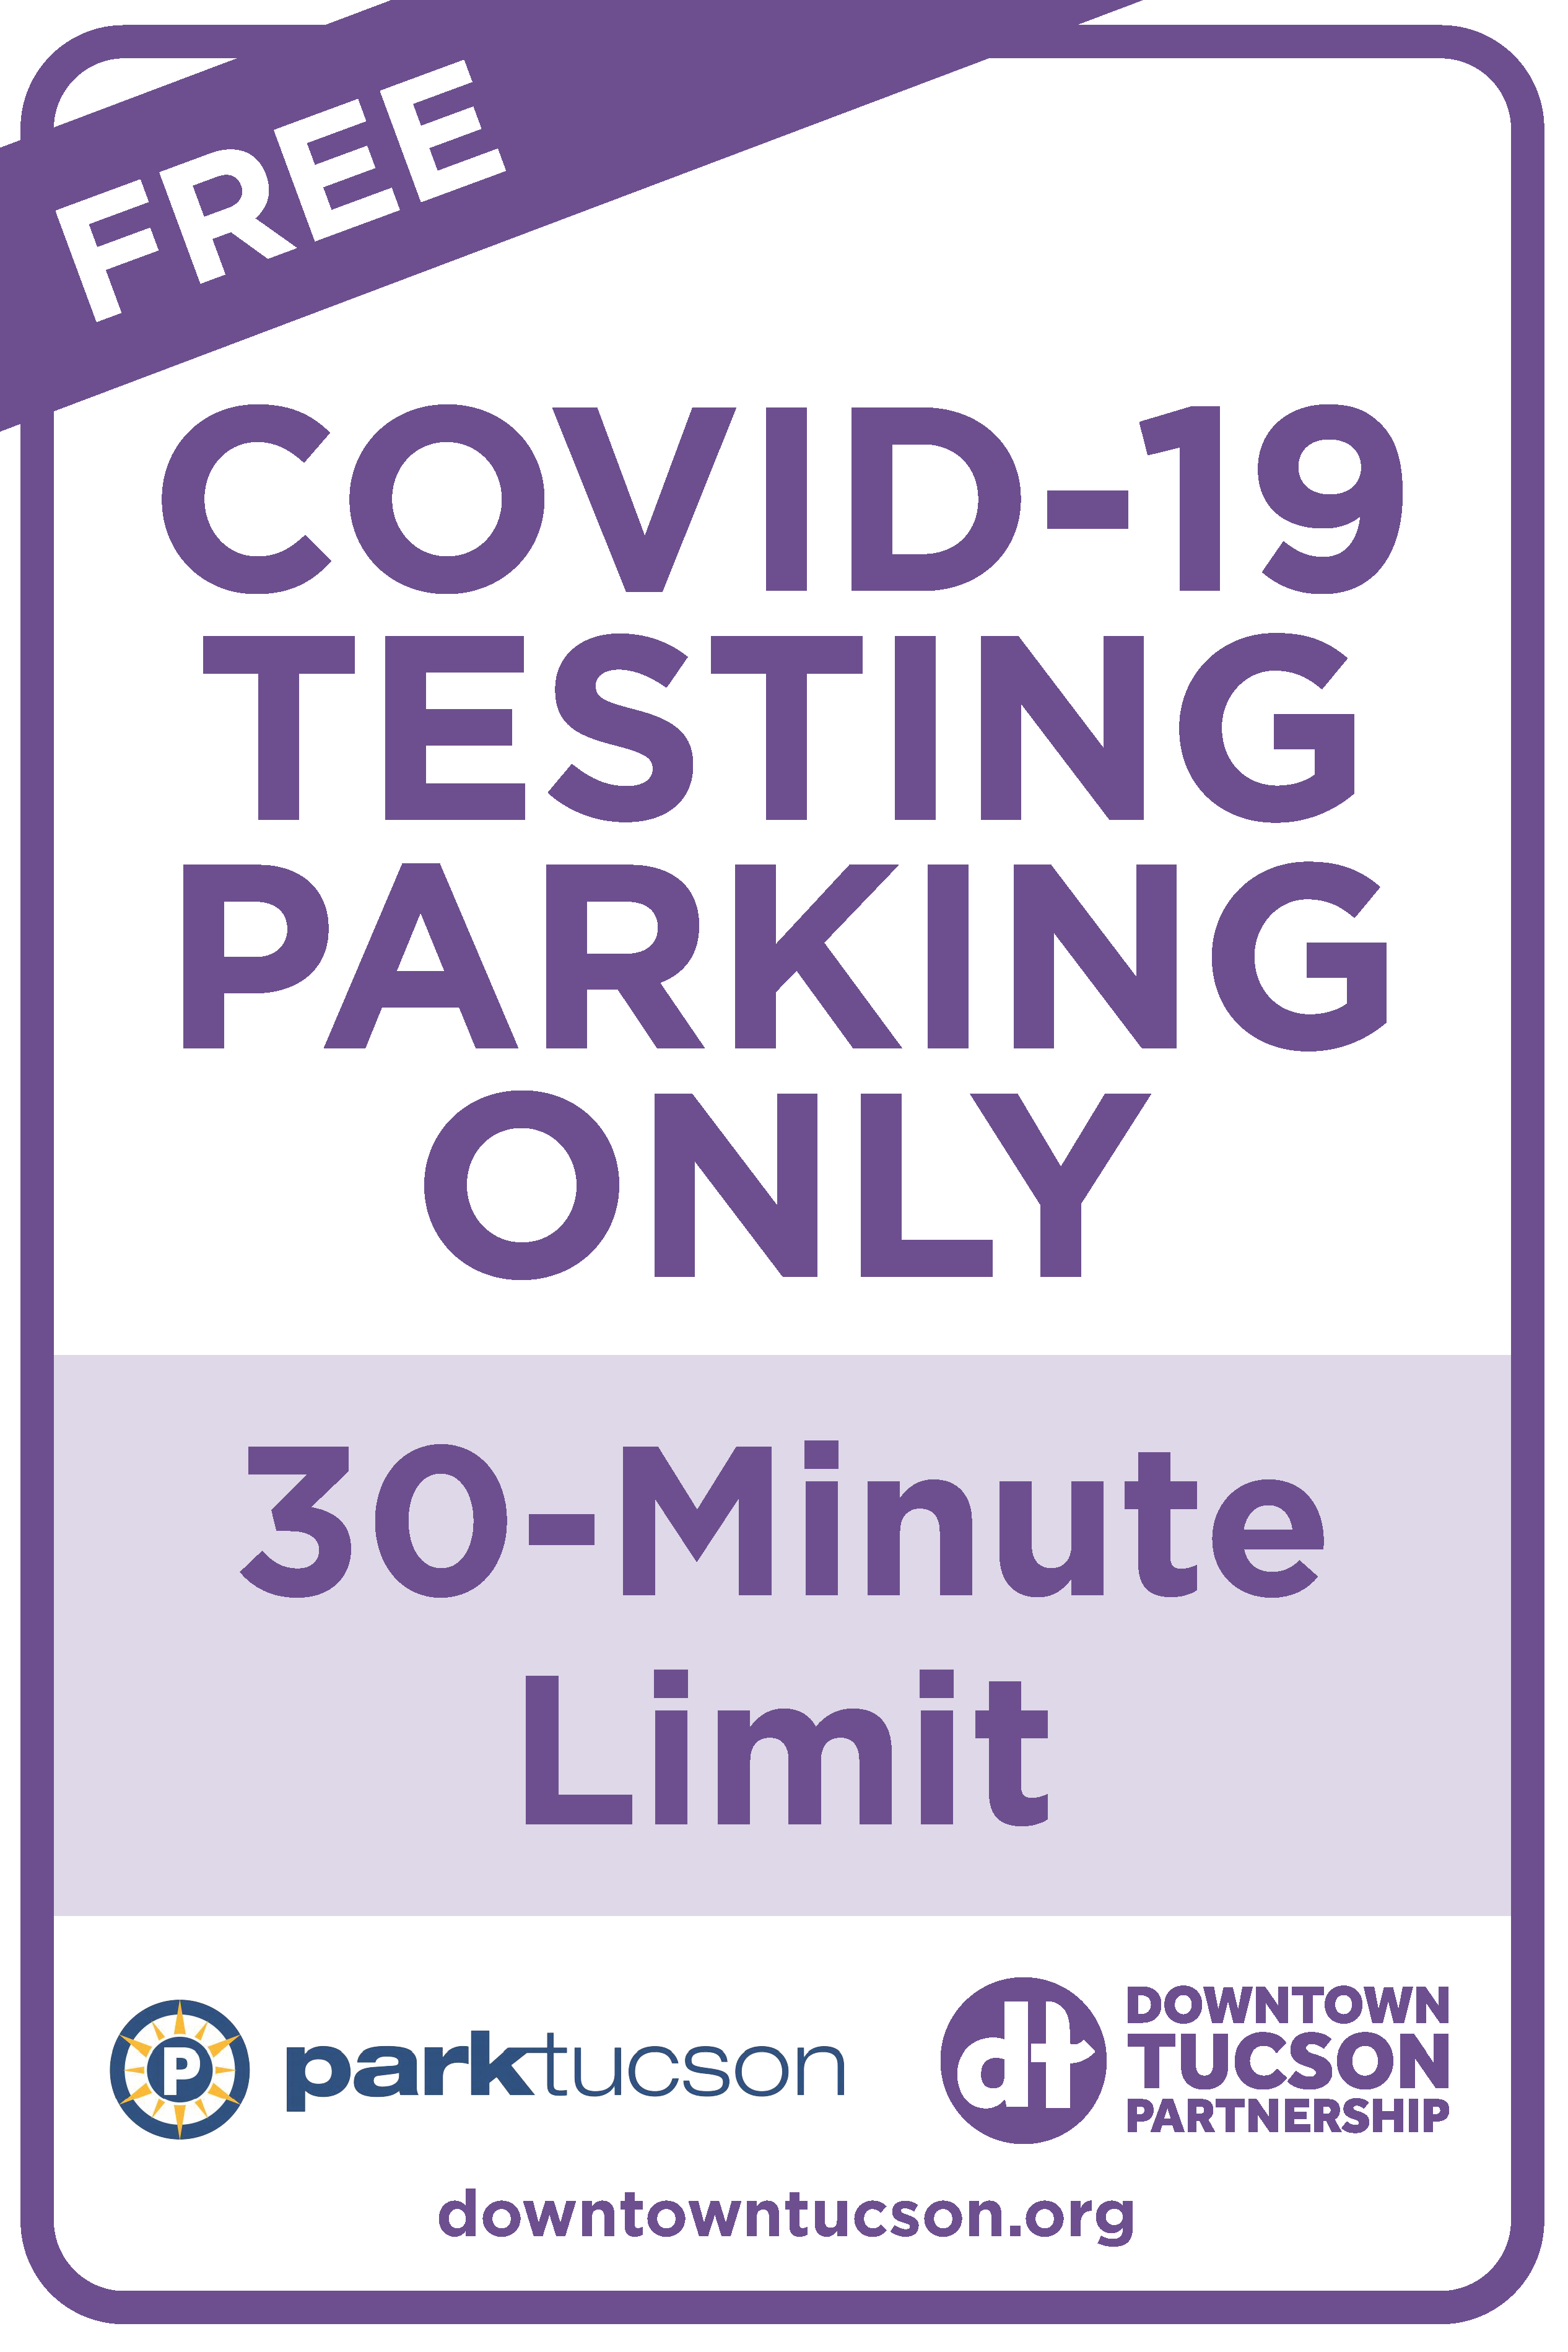 dtp 021 covid testing parking signs 12x18 (1)